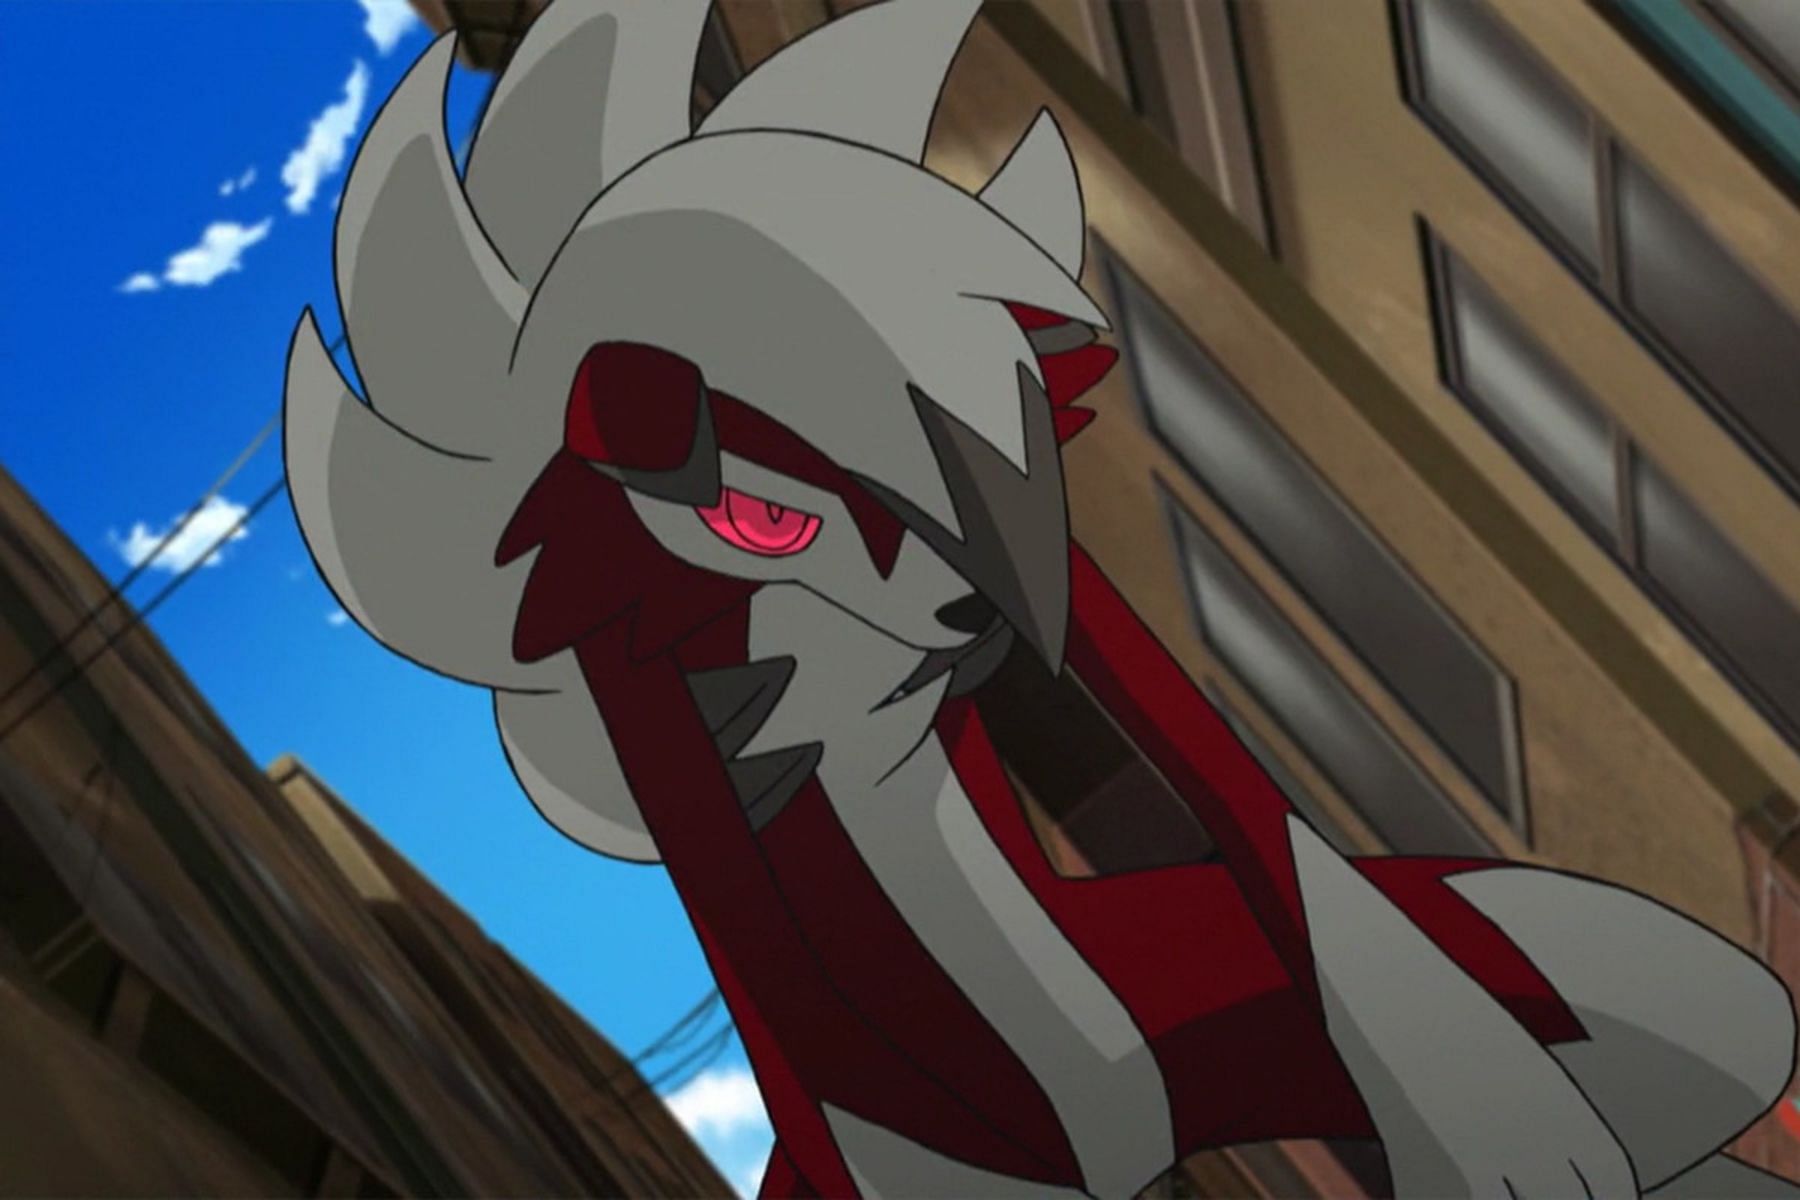 Midnight Lycanroc as it appears in the Pokemon anime (Image via The Pokemon Company)